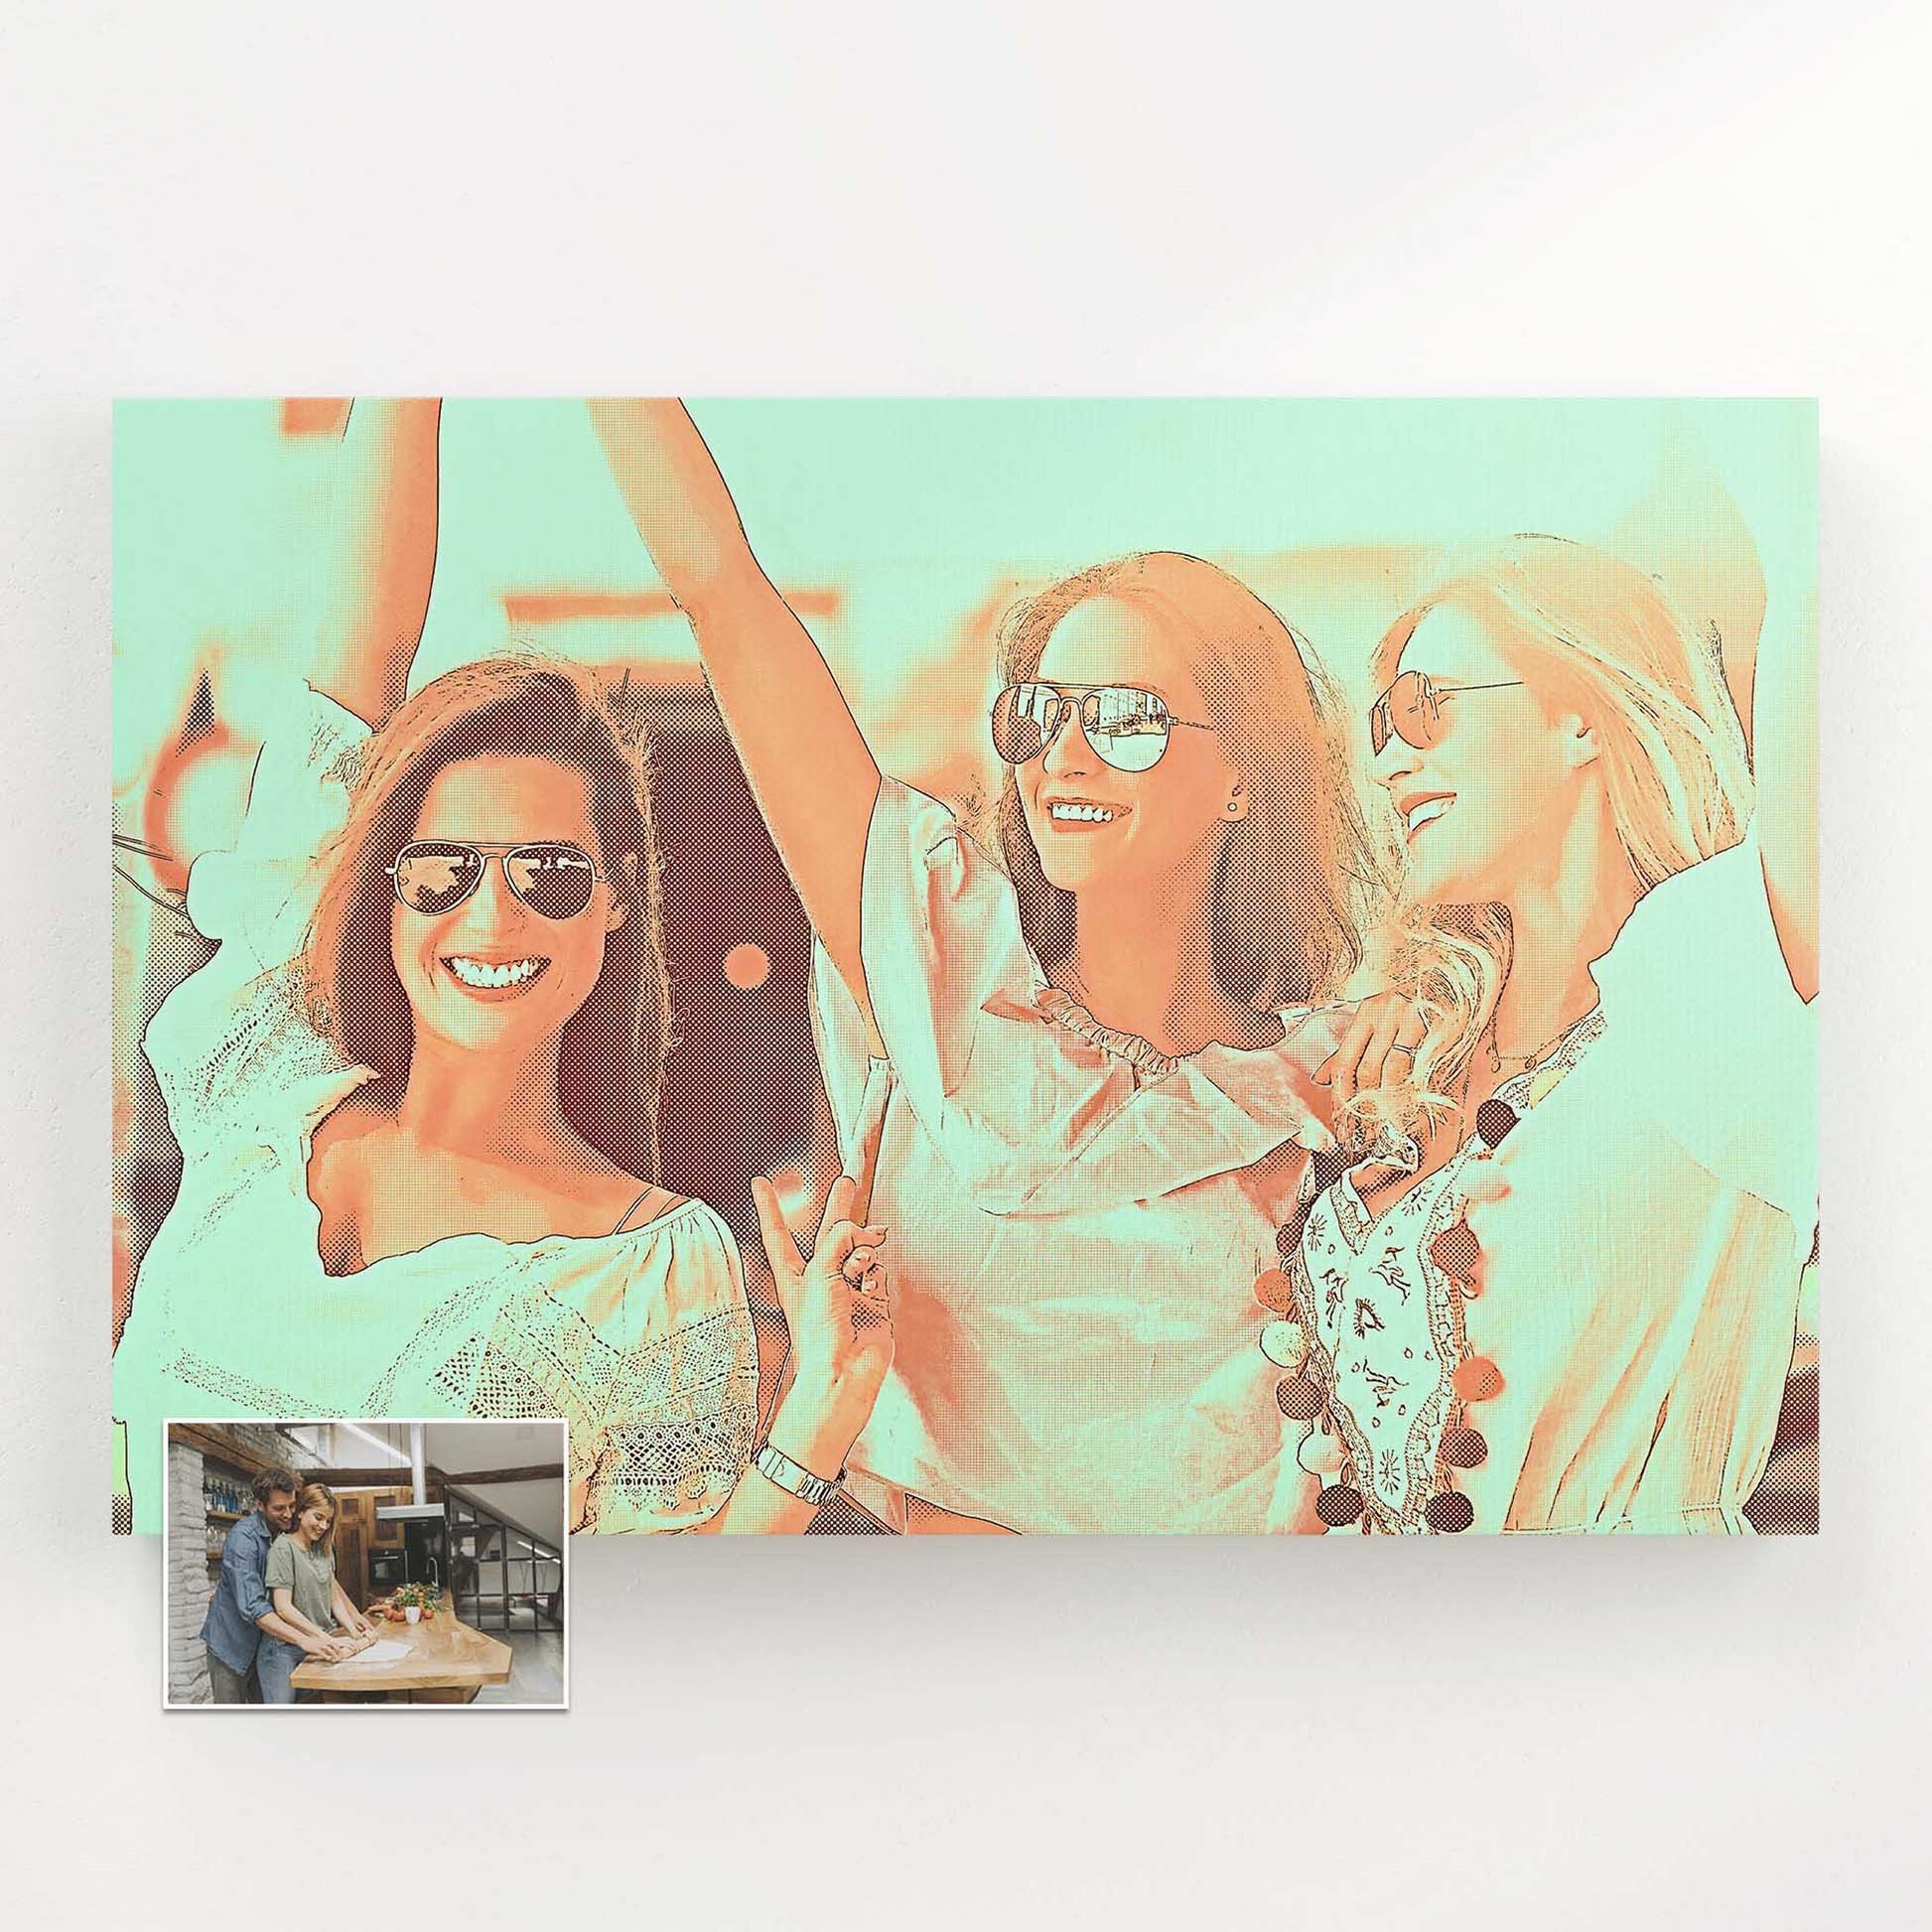 Experience the unique charm of the Personalised Orange and Green Canvas. This one-of-a-kind artwork showcases a custom drawing based on your photo, meticulously printed on handmade woven canvas. Its playful orange and green hues radiate fun